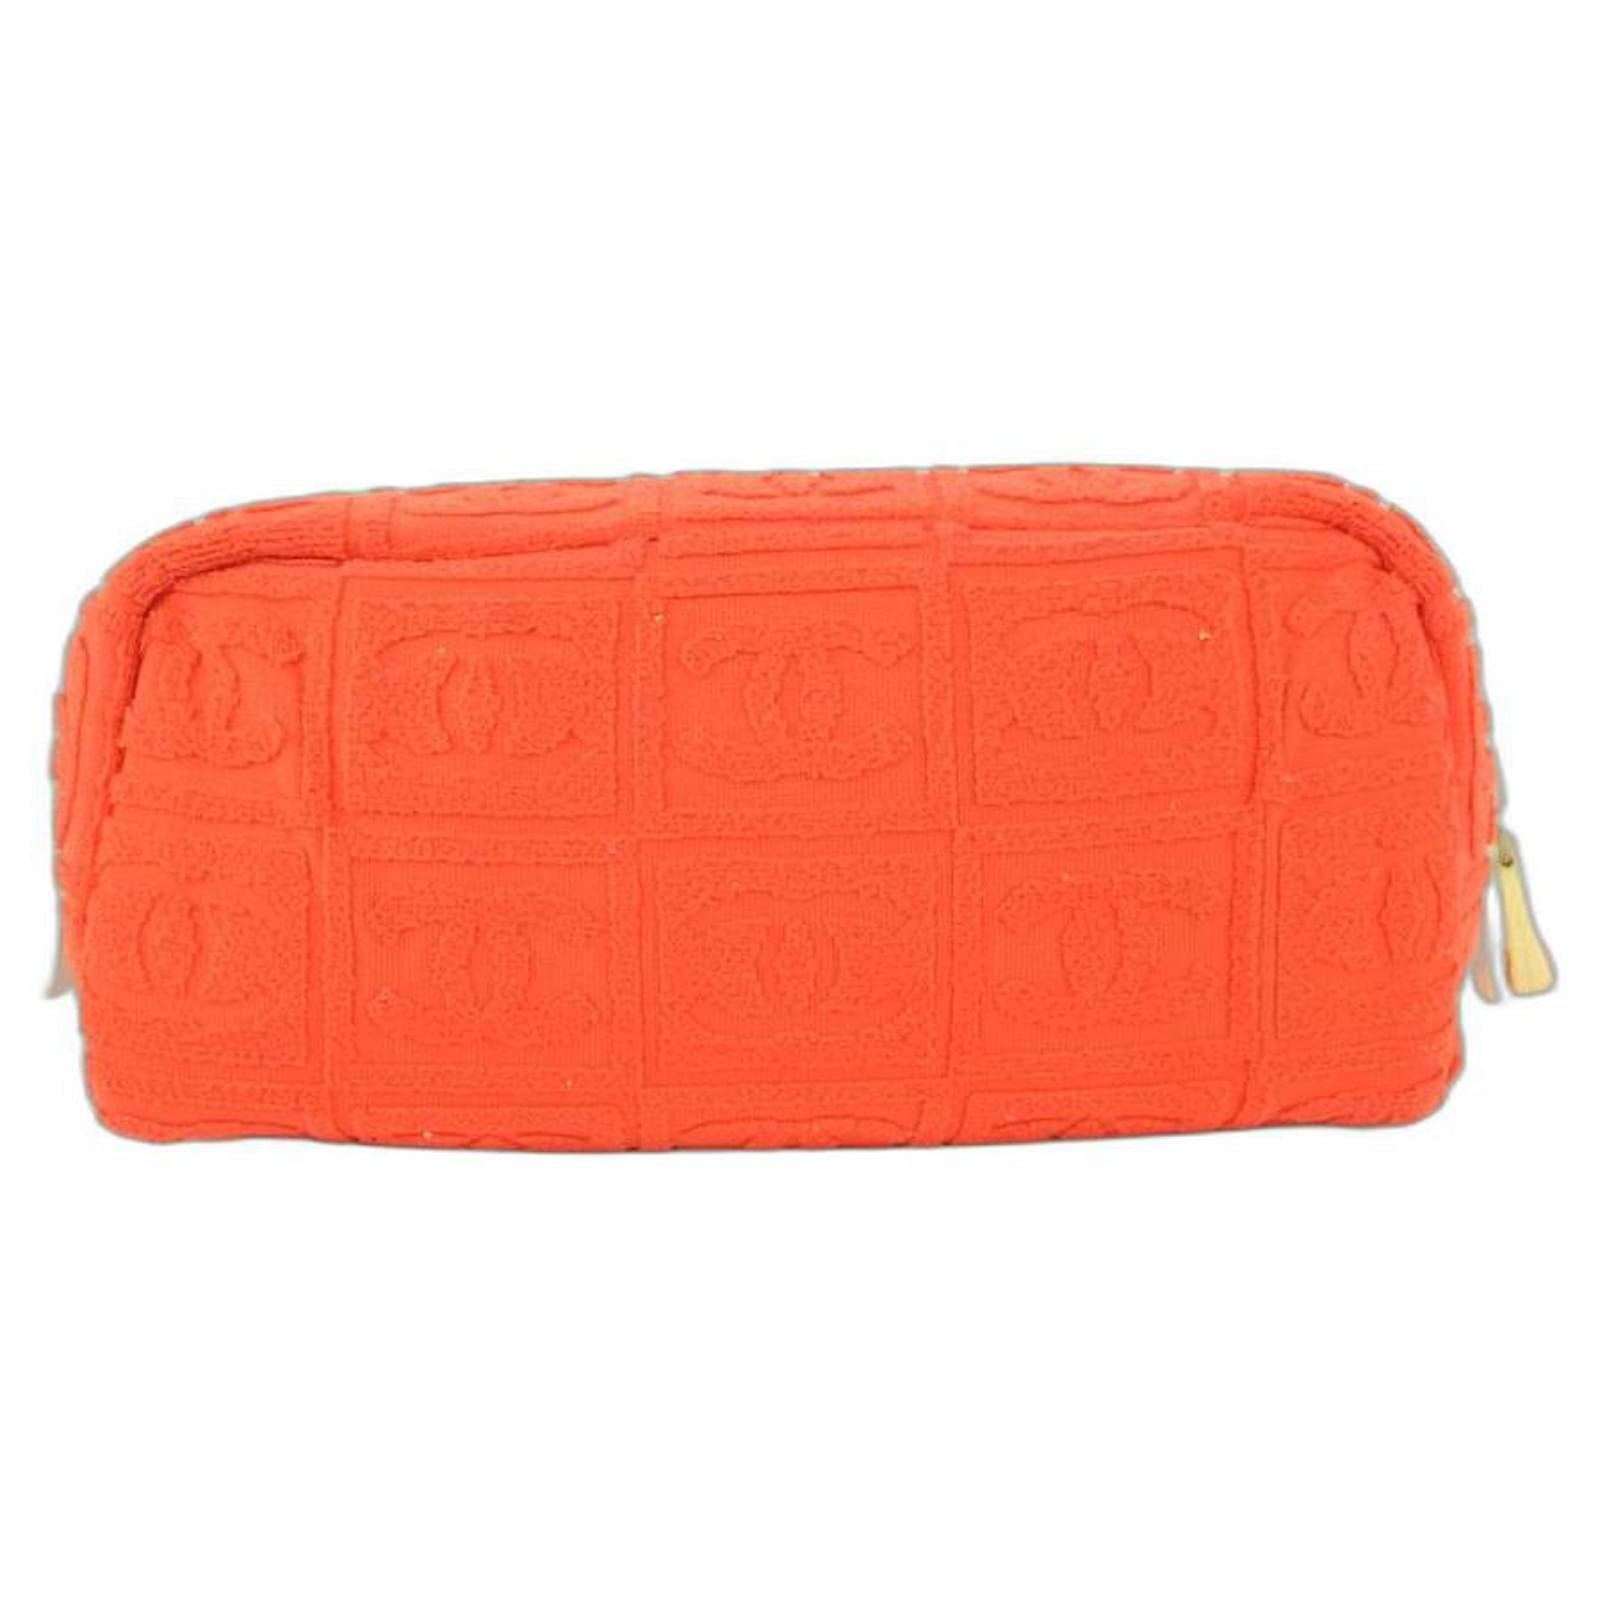 Chanel Orange Quilted Lambskin Cosmetic Pouch Q6ACVY1IOB000